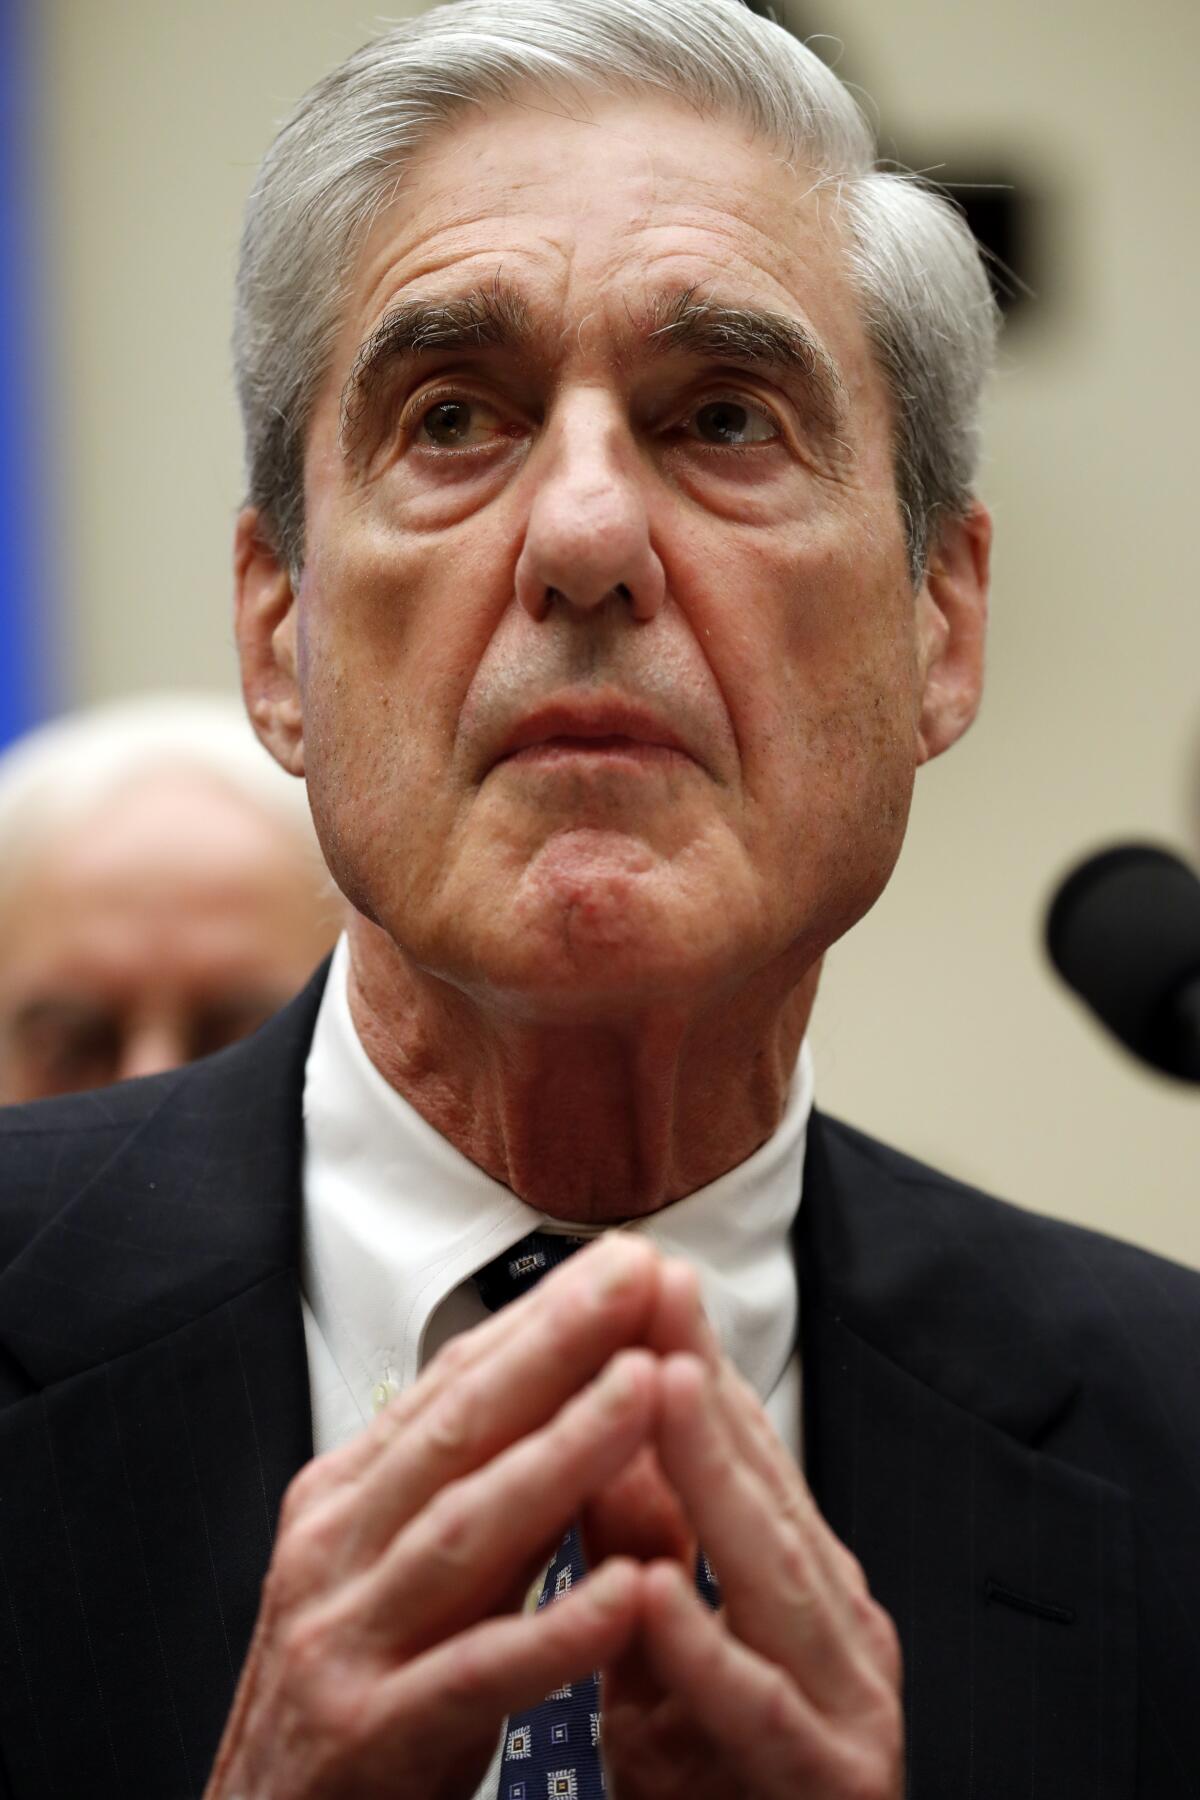 Former special counsel Robert S. Mueller III testified before the House Intelligence Committee on Wednesday.